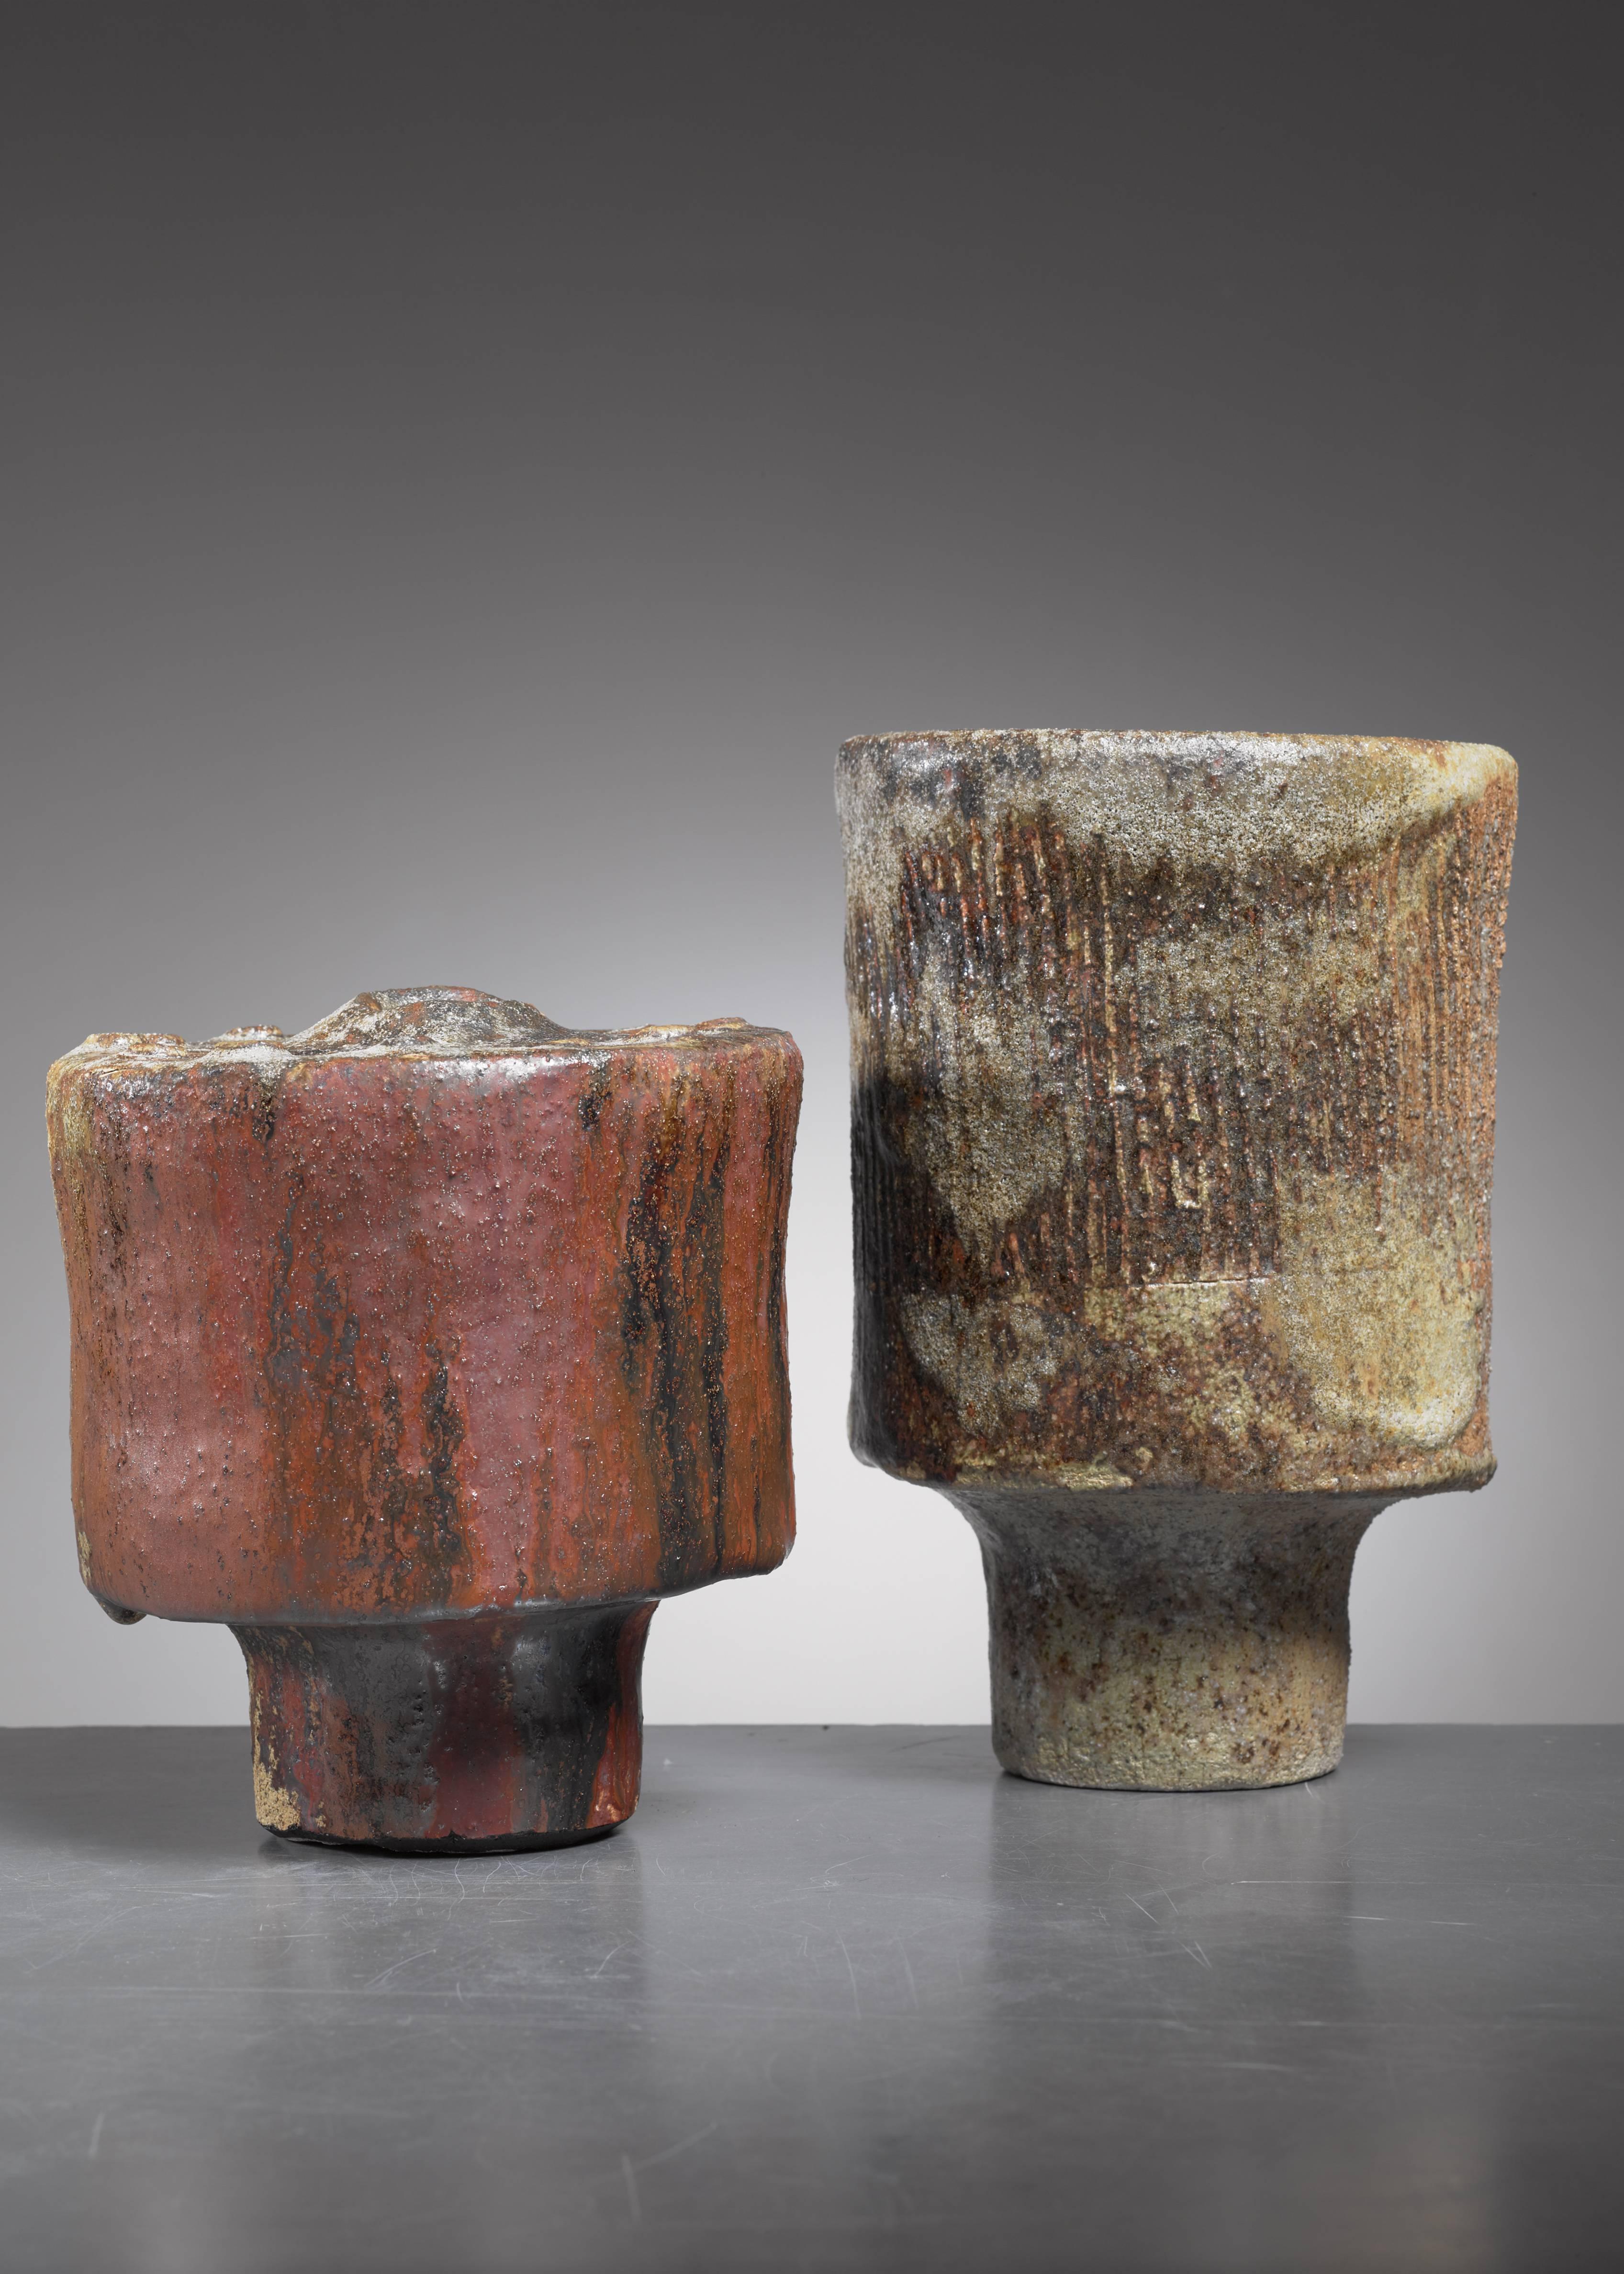 A pair of cylindrical ceramic vases with an earth tone glazing, by Spanish born ceramist José Berlanga (1947).

The measurements stated are of the brown vase. The taller vase is 23 cm high with a 15 cm diameter.